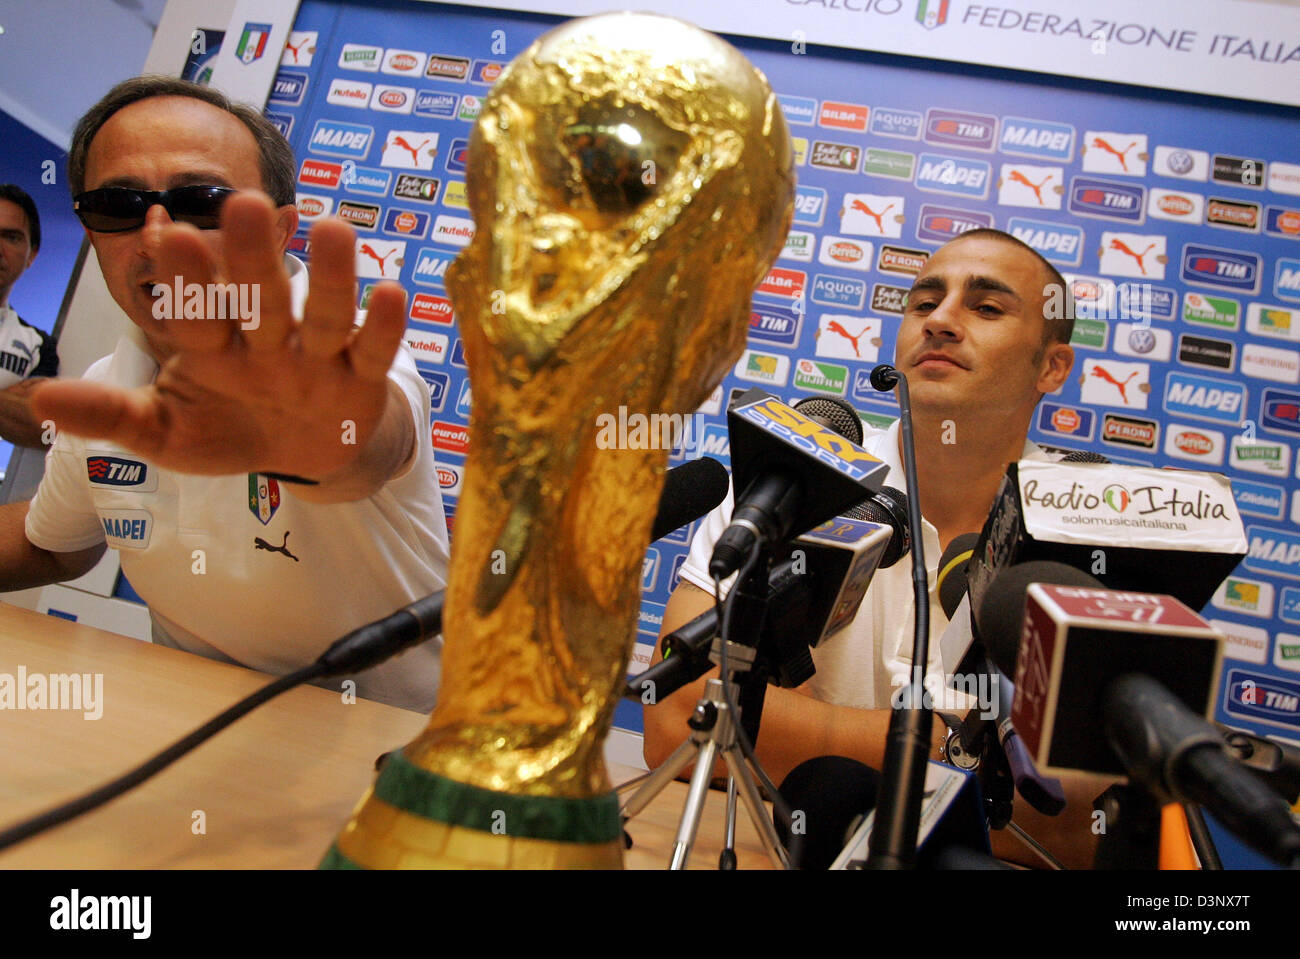 Italian player Fabio Cannavaro (R) sits behind the World Cup trophy during a press conference in Duisburg, Germany, Monday, 10 July 2006. Italy became the new FIFA World Champion defeating France in a penalty shoot-out in Berlin on Sunday. Man at left is unidentified. Foto: Bernd Thissen dpa/lnw +++(c) dpa - Bildfunk+++ Stock Photo